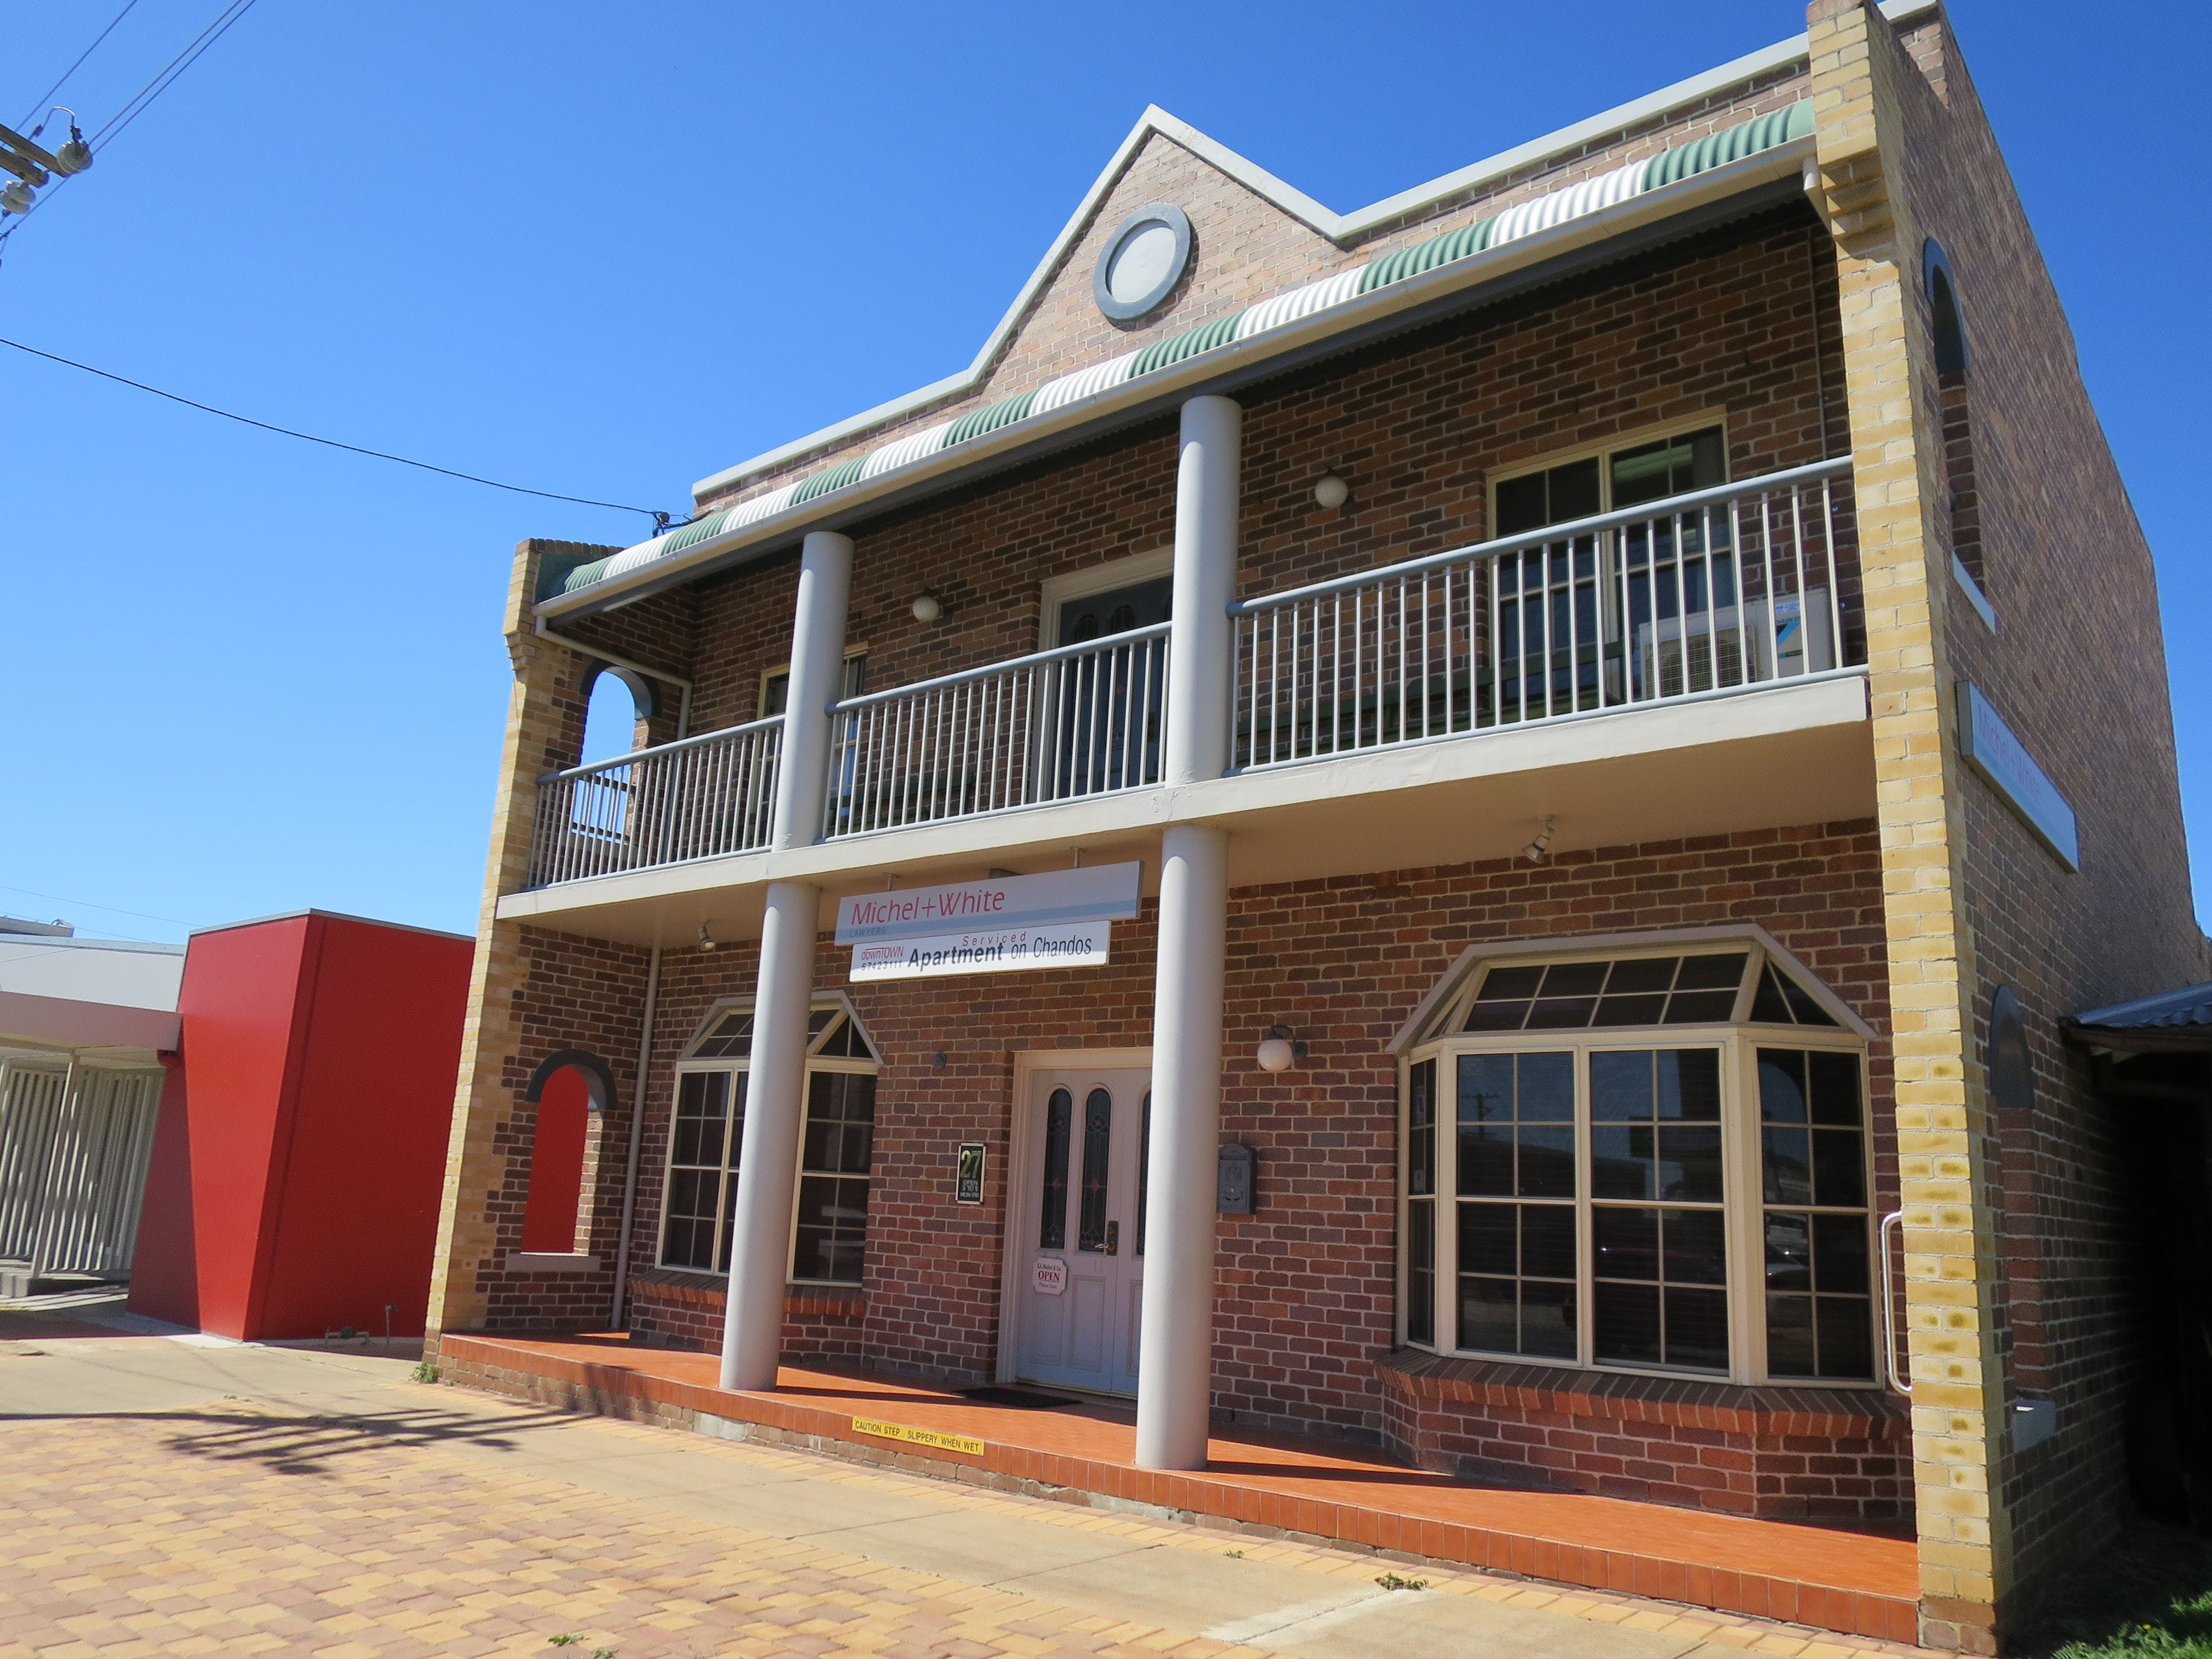 Downtown Apartment on Chandos - Perisher Accommodation